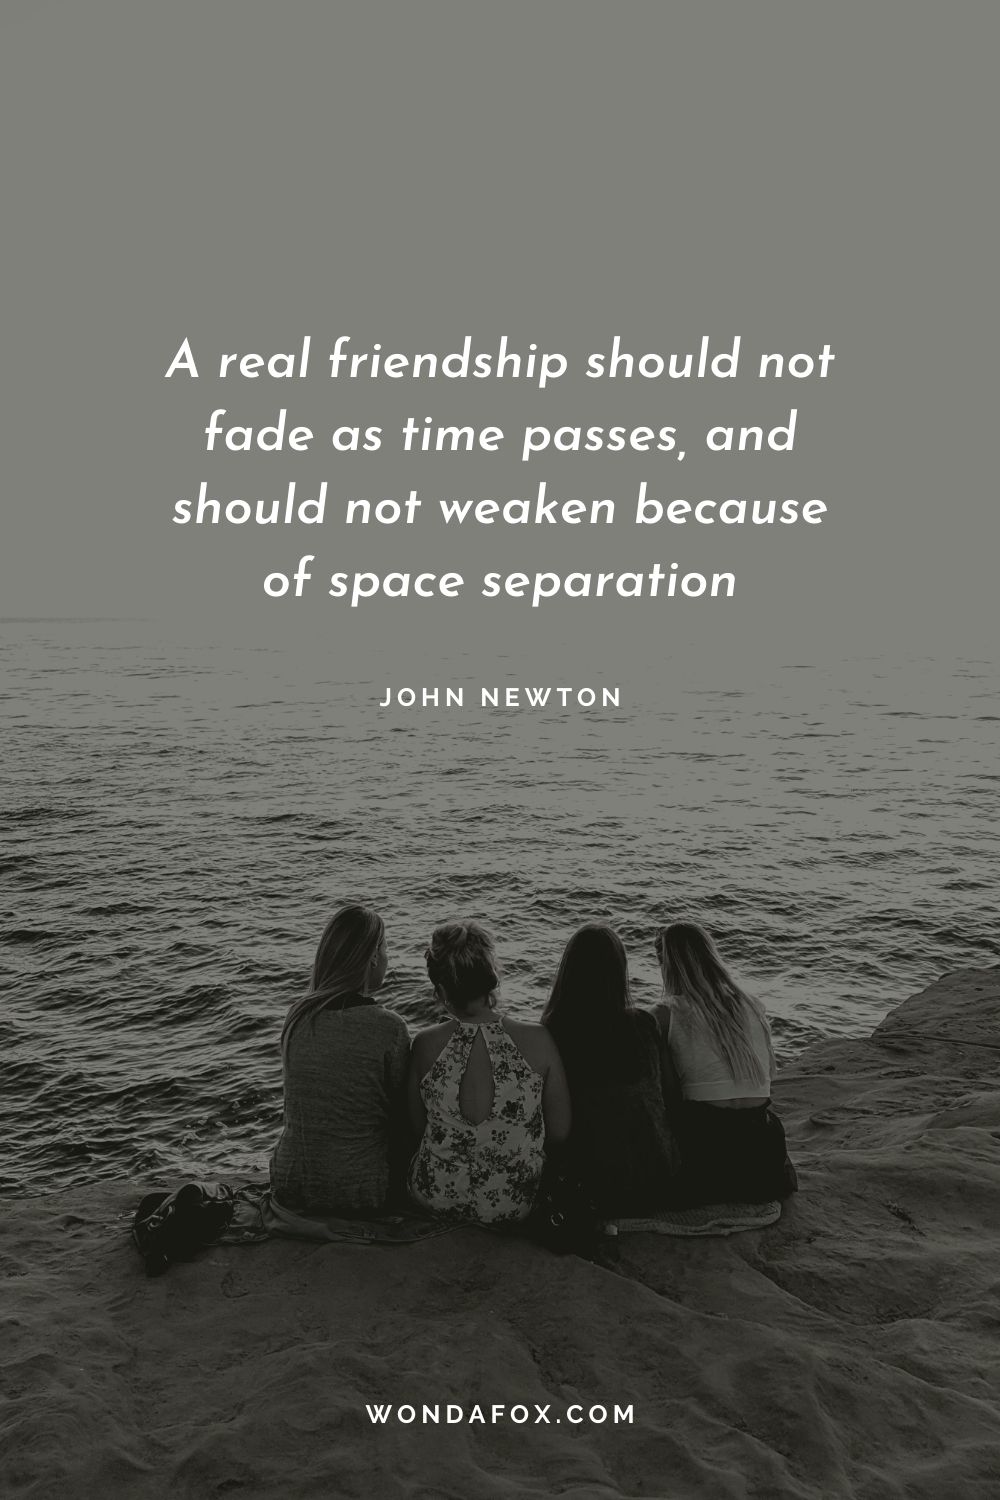 A real friendship should not fade as time passes, and should not weaken because of space separation